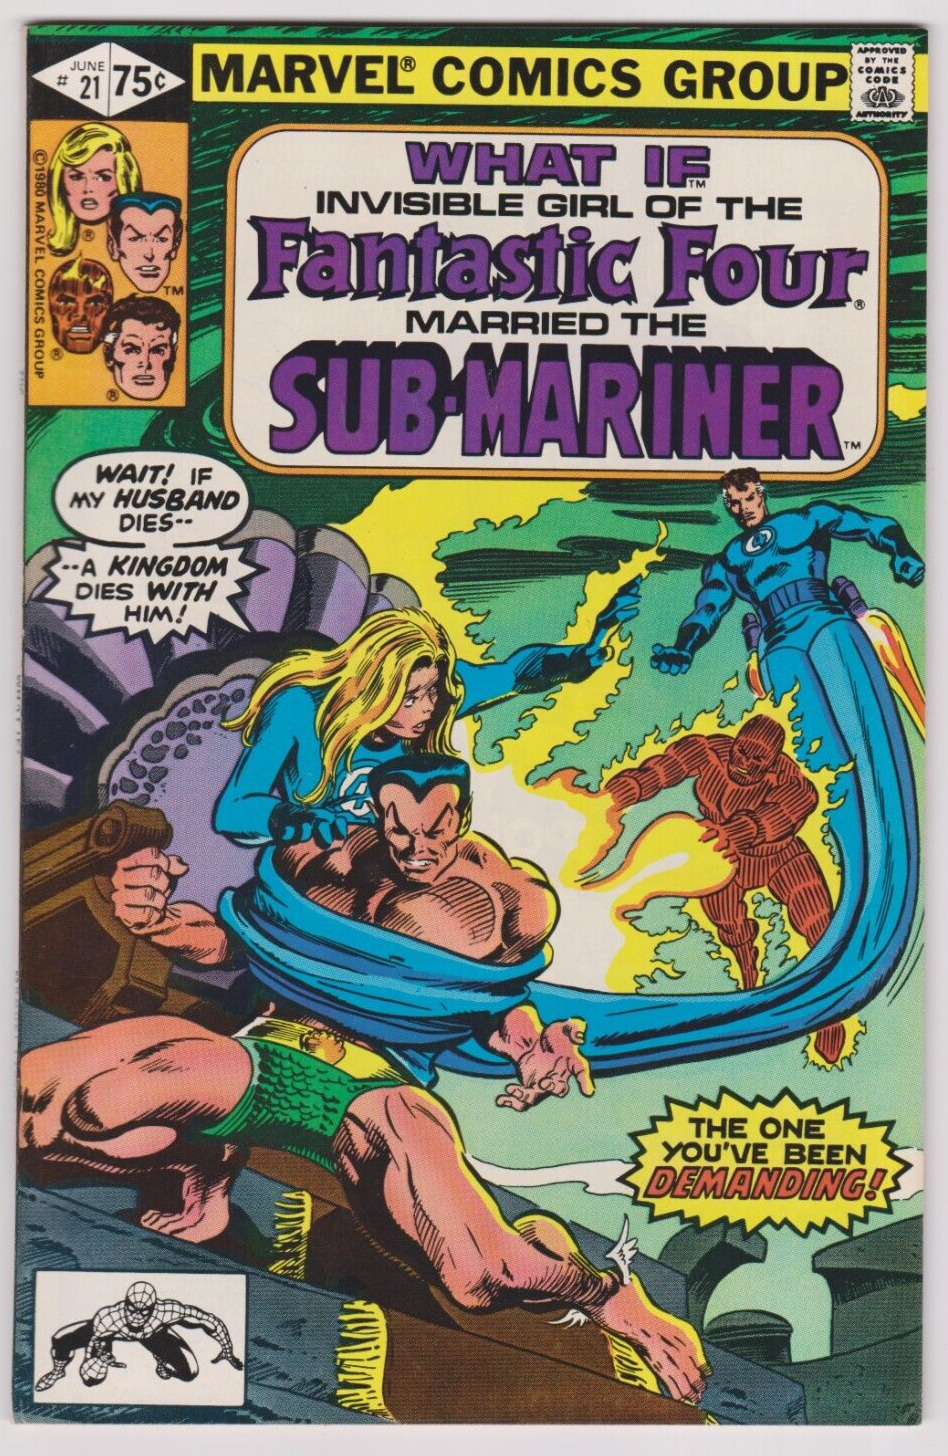 What If? #21 (Jun 1980, Marvel Comics) Invisible Girl Married The Sub-Mariner